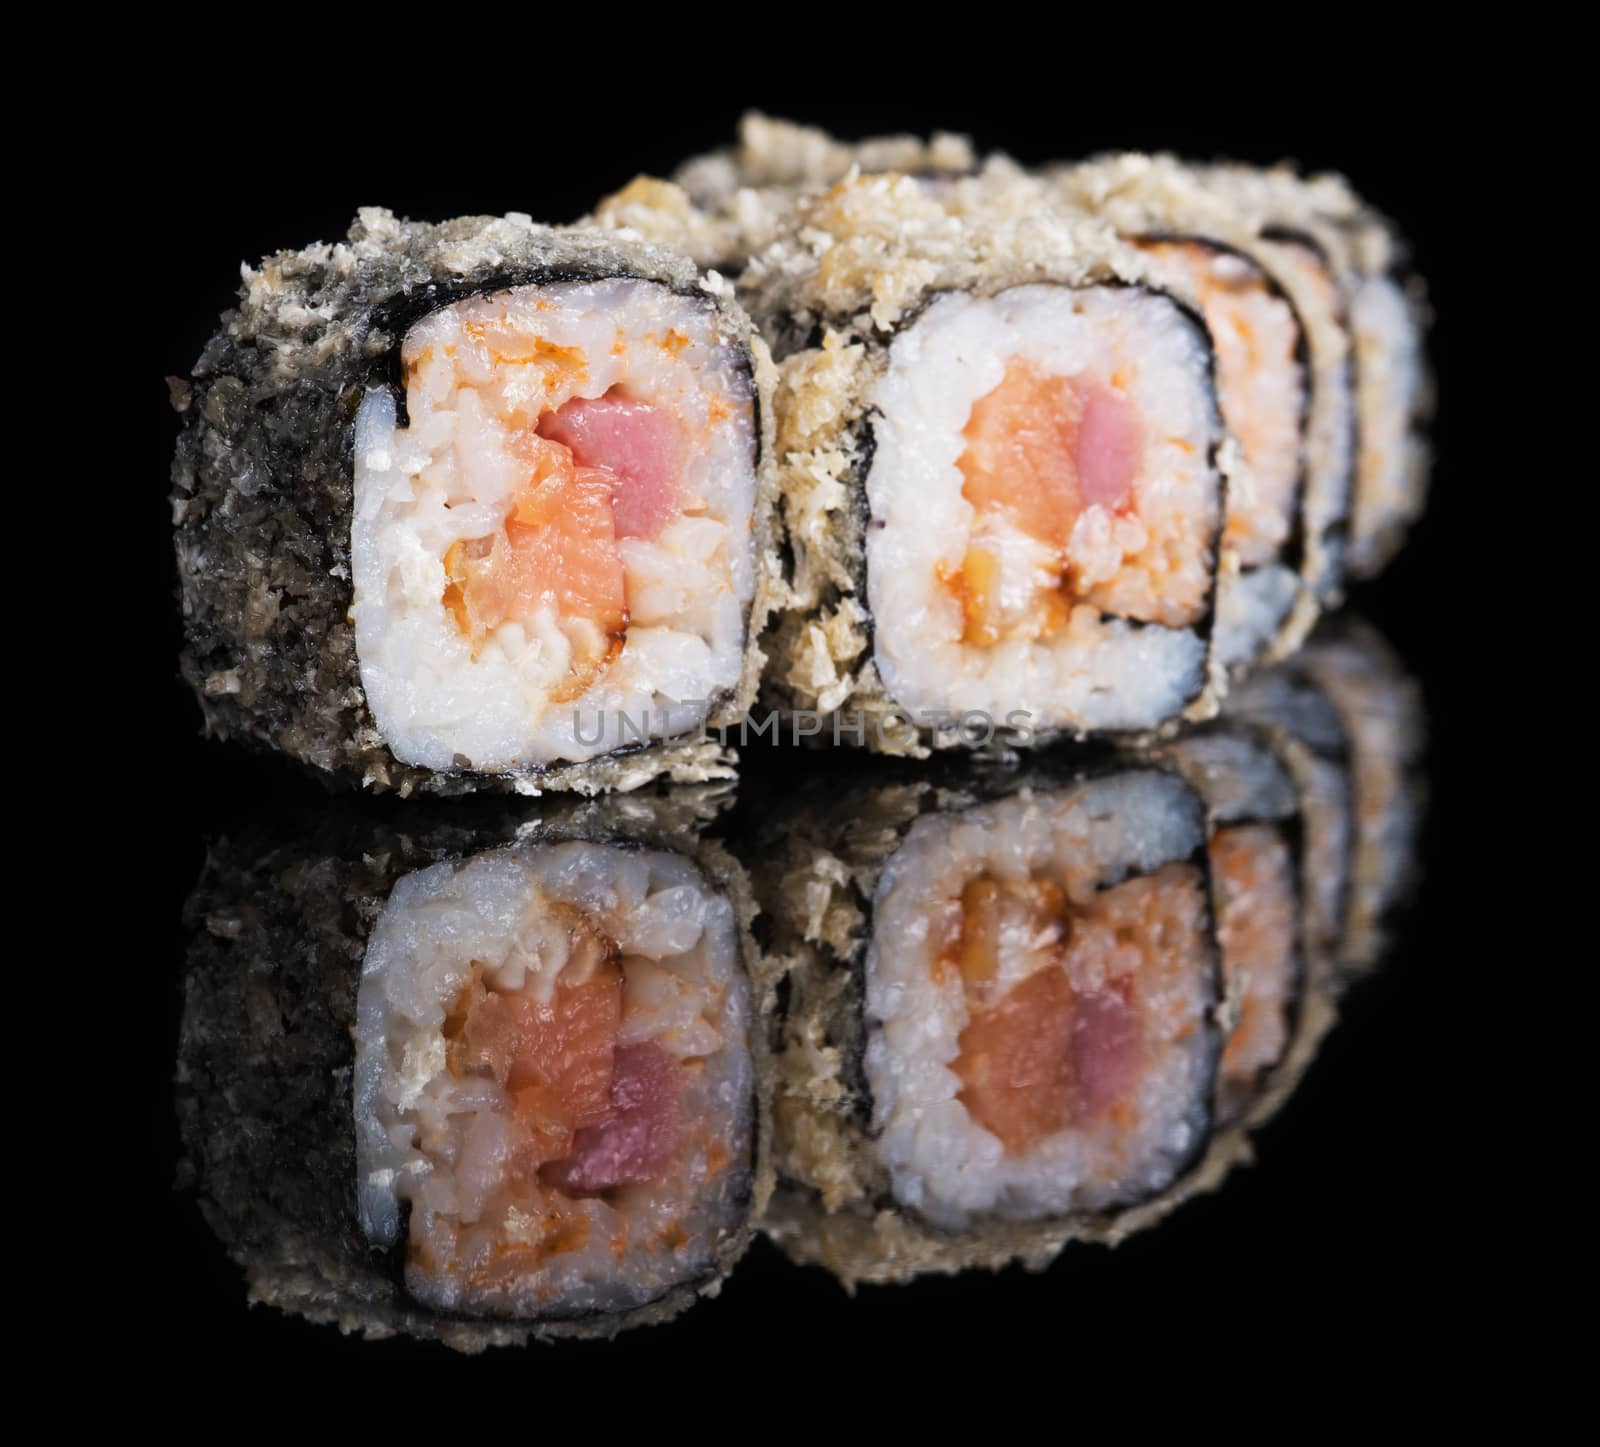 Grilled sushi rolls with salmon, tuna and eel by kzen